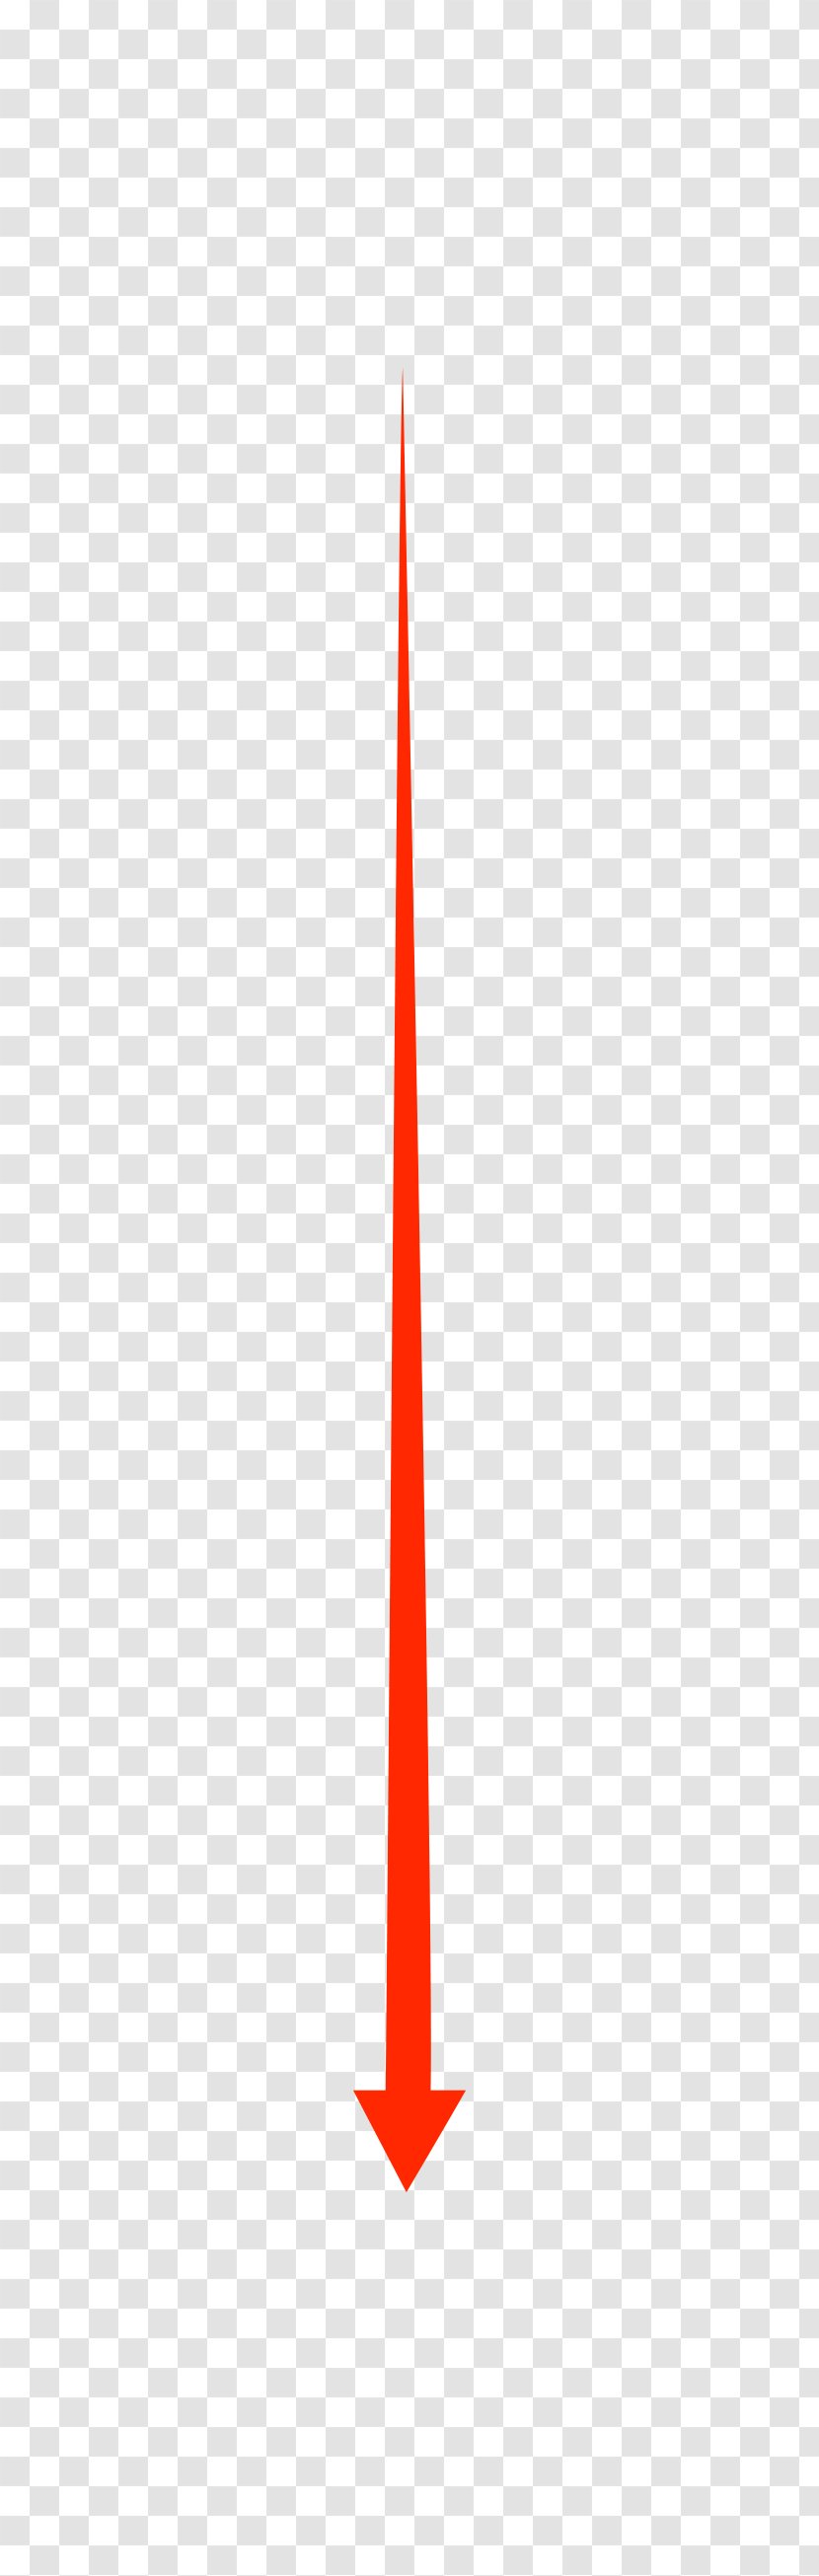 Angle Pattern - Cone - Vector Red Needle Transparent PNG